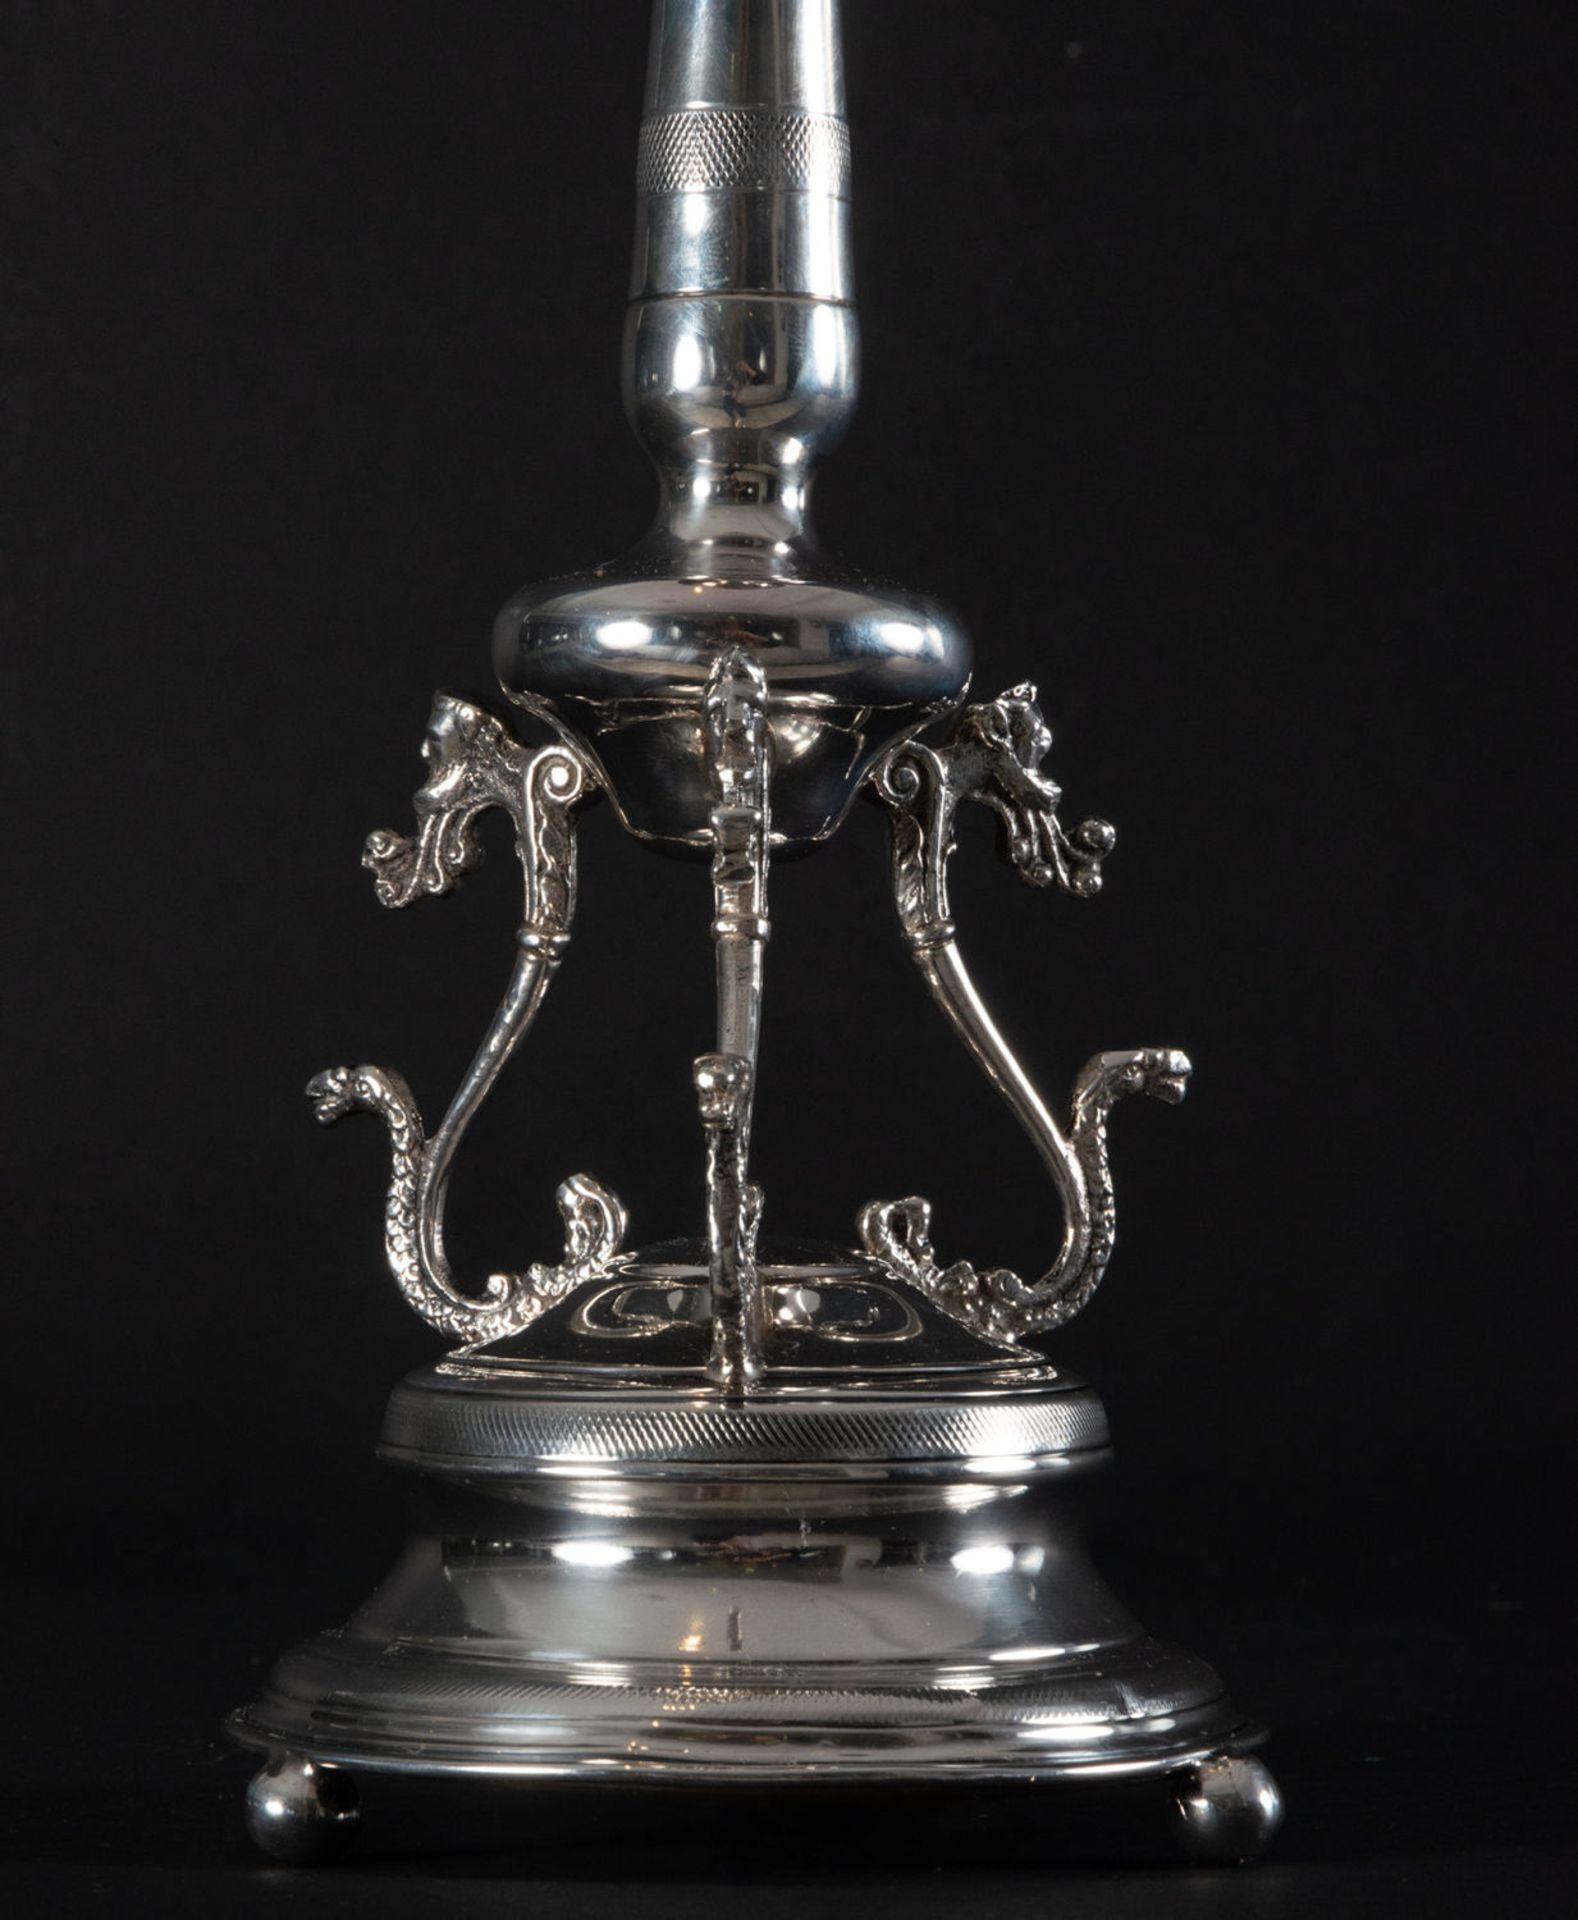 Pair of Spanish Regency-style silver candlesticks, 19th century - Image 3 of 5